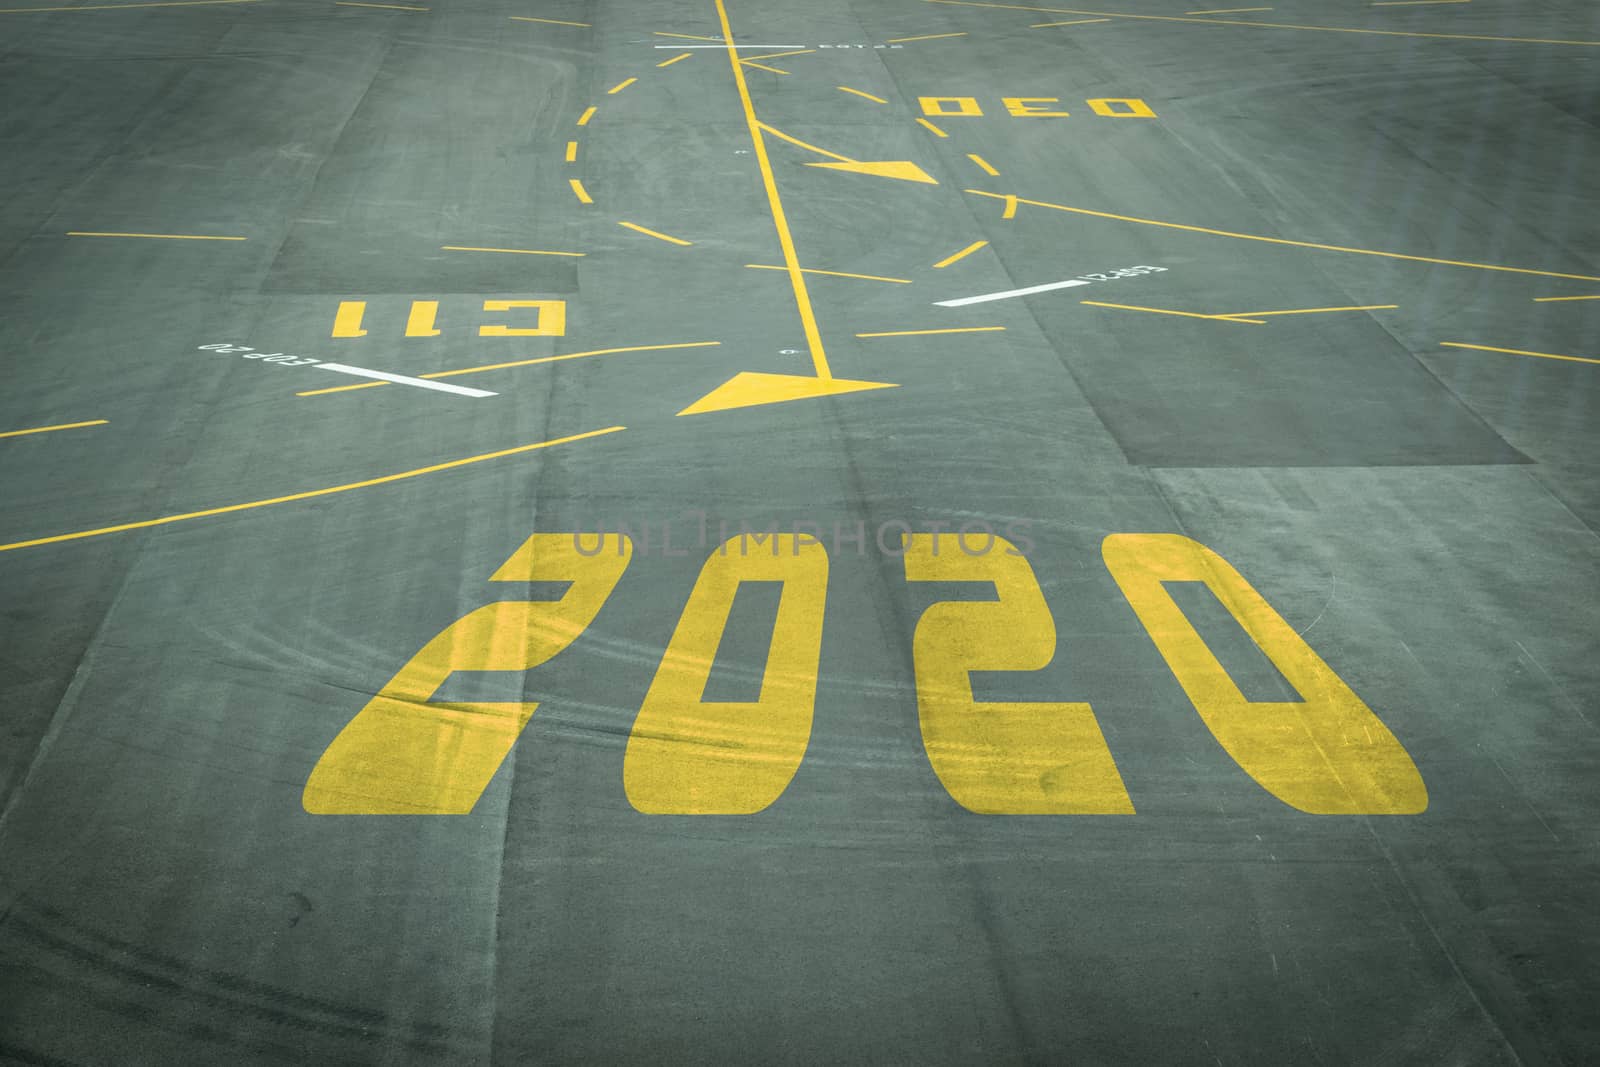 The 2020 number sign on the airport runway shows the coming New Year's reception soon.